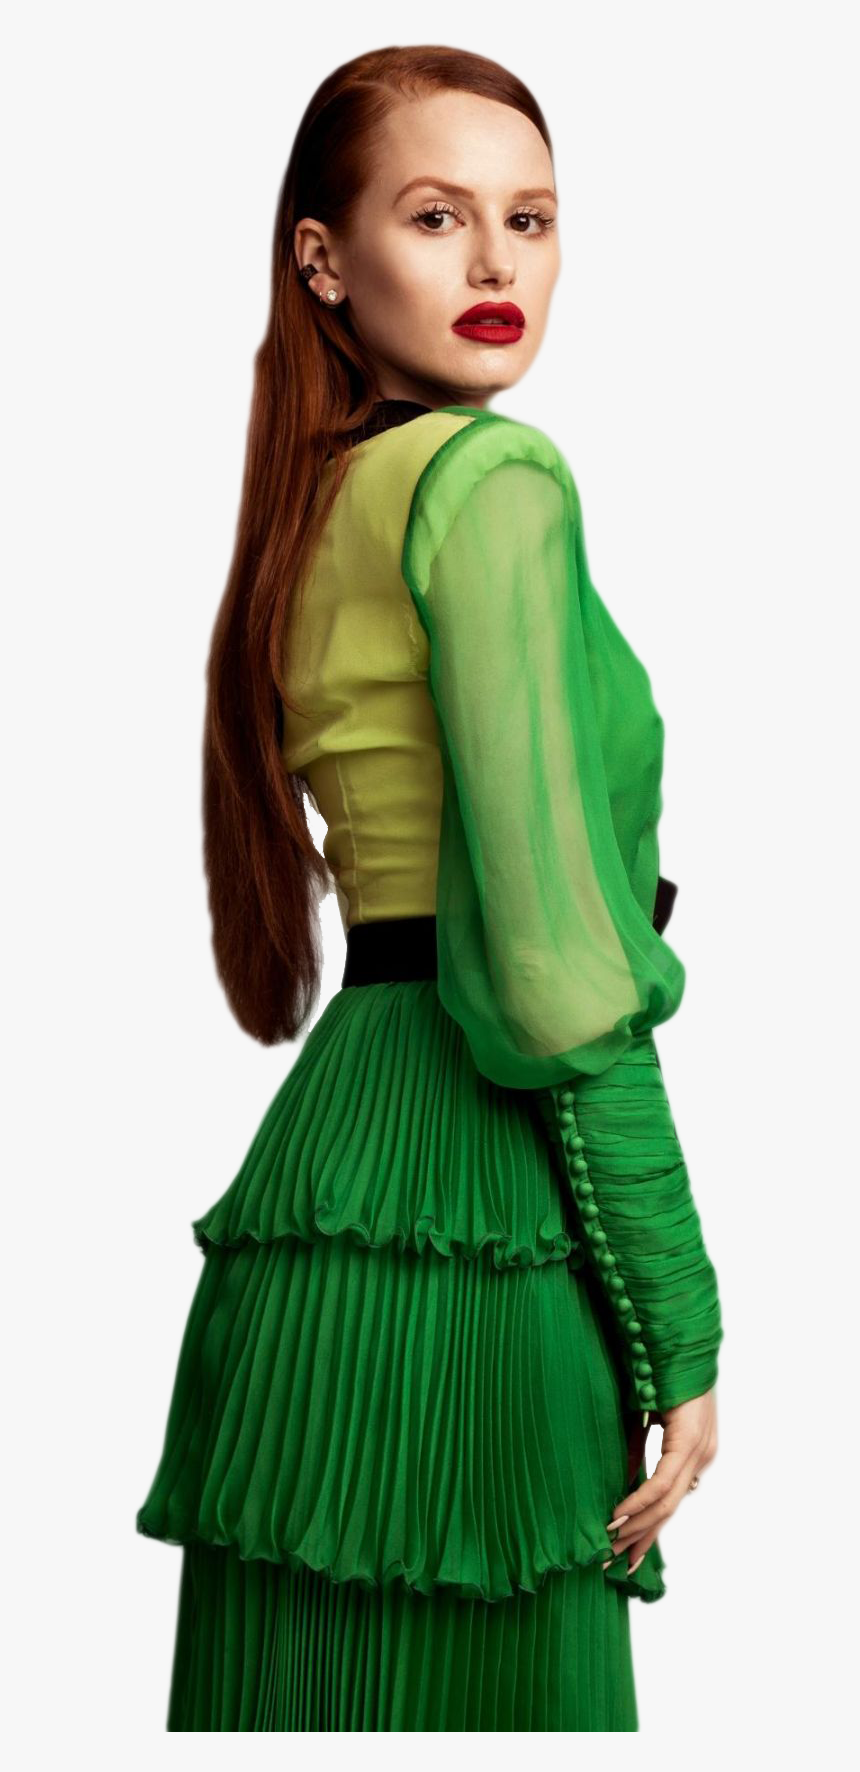 Madelaine Petsch Png, Transparent Png, Free Download